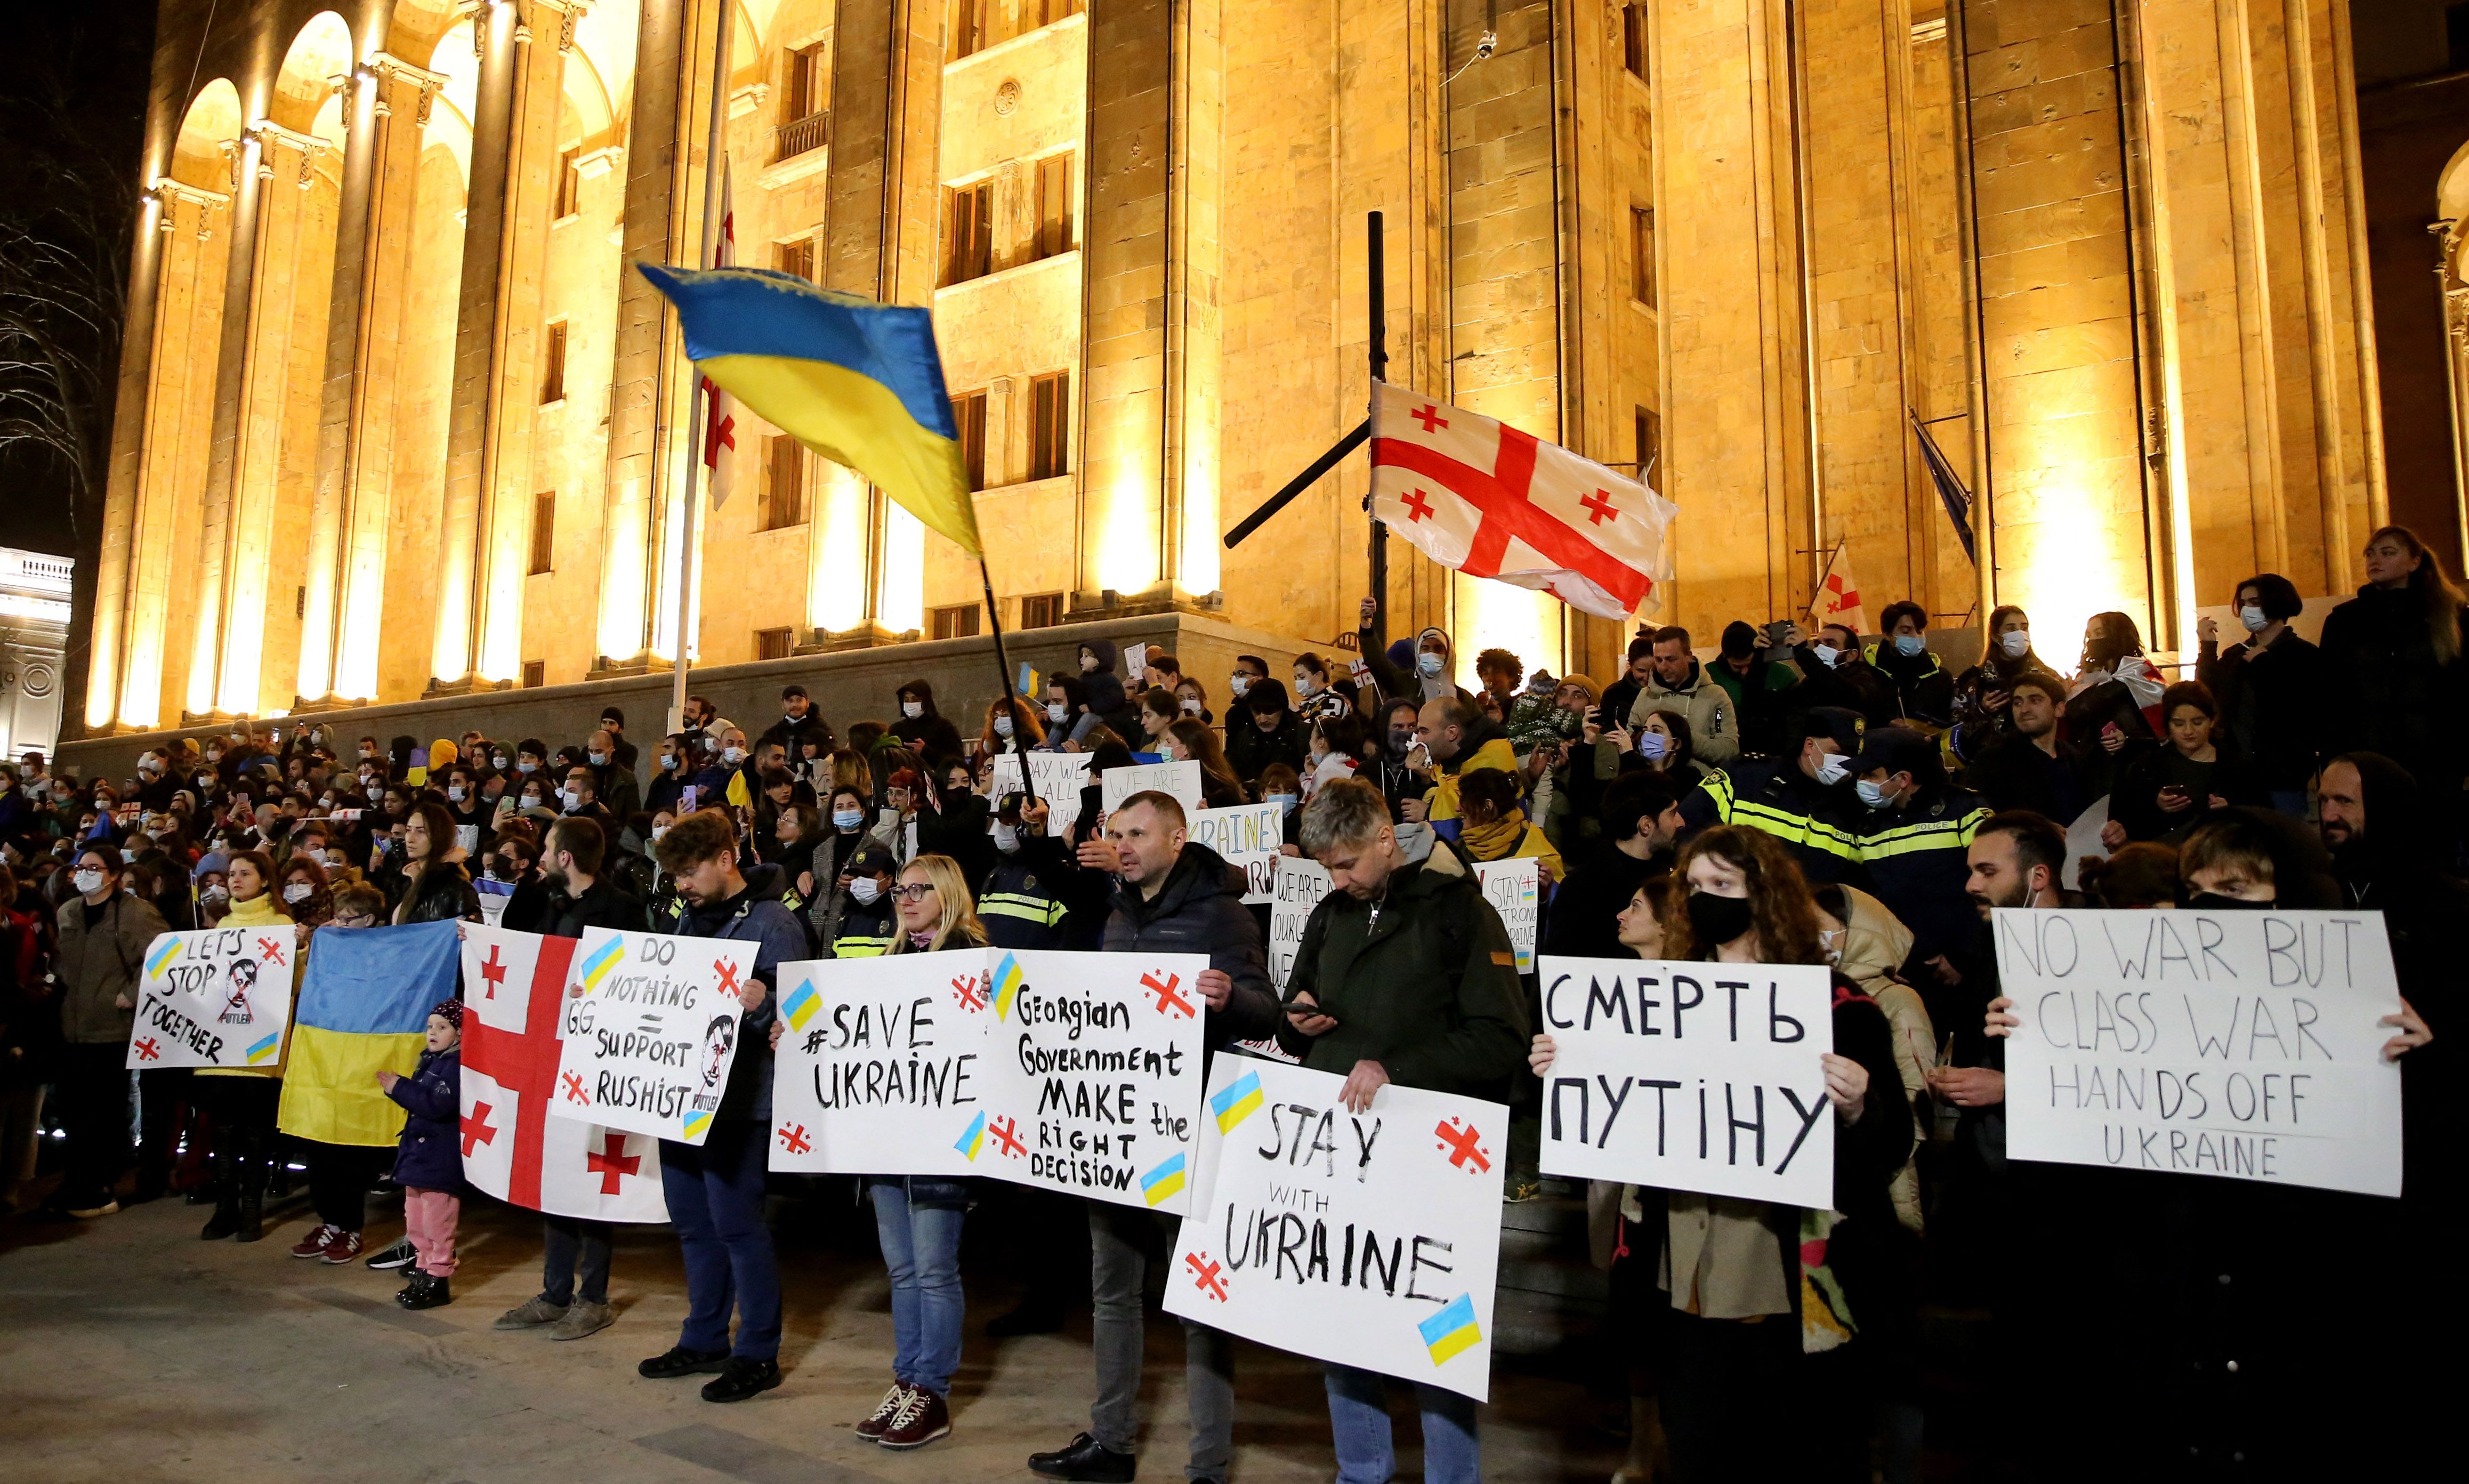 Photo of people holding signs and waving flags in support of Ukraine at night in front of a large lit-up building